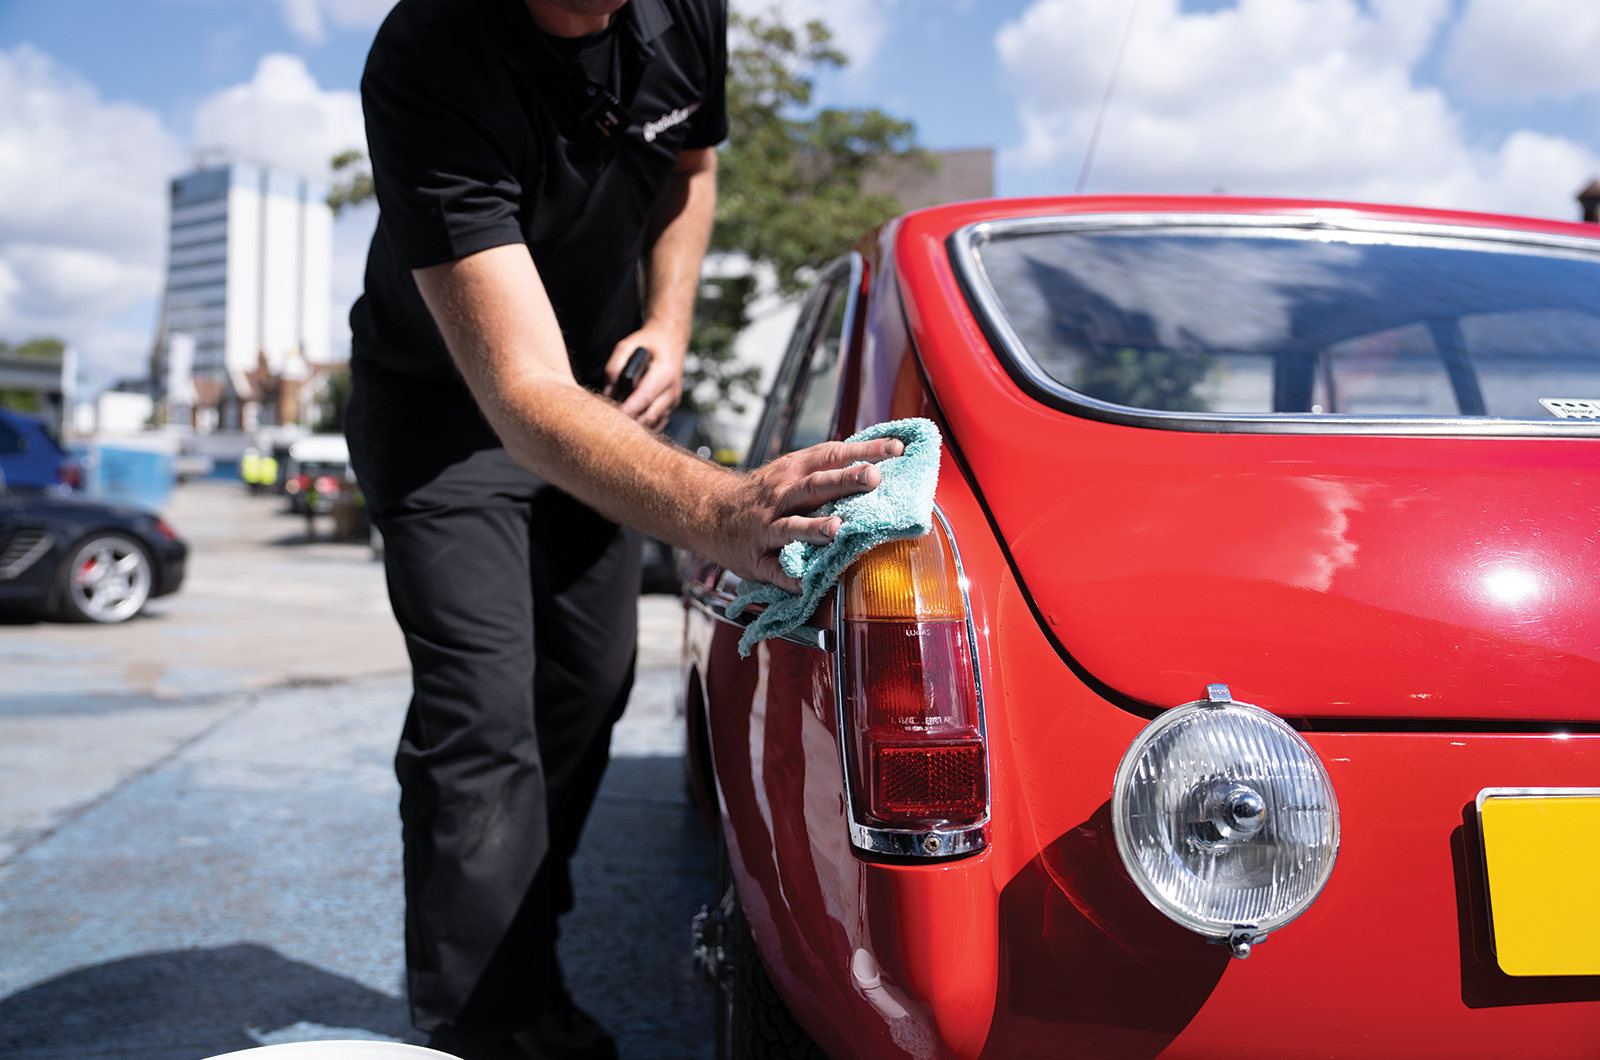 Classic & Sports Car – The specialist: Perfection Detailing